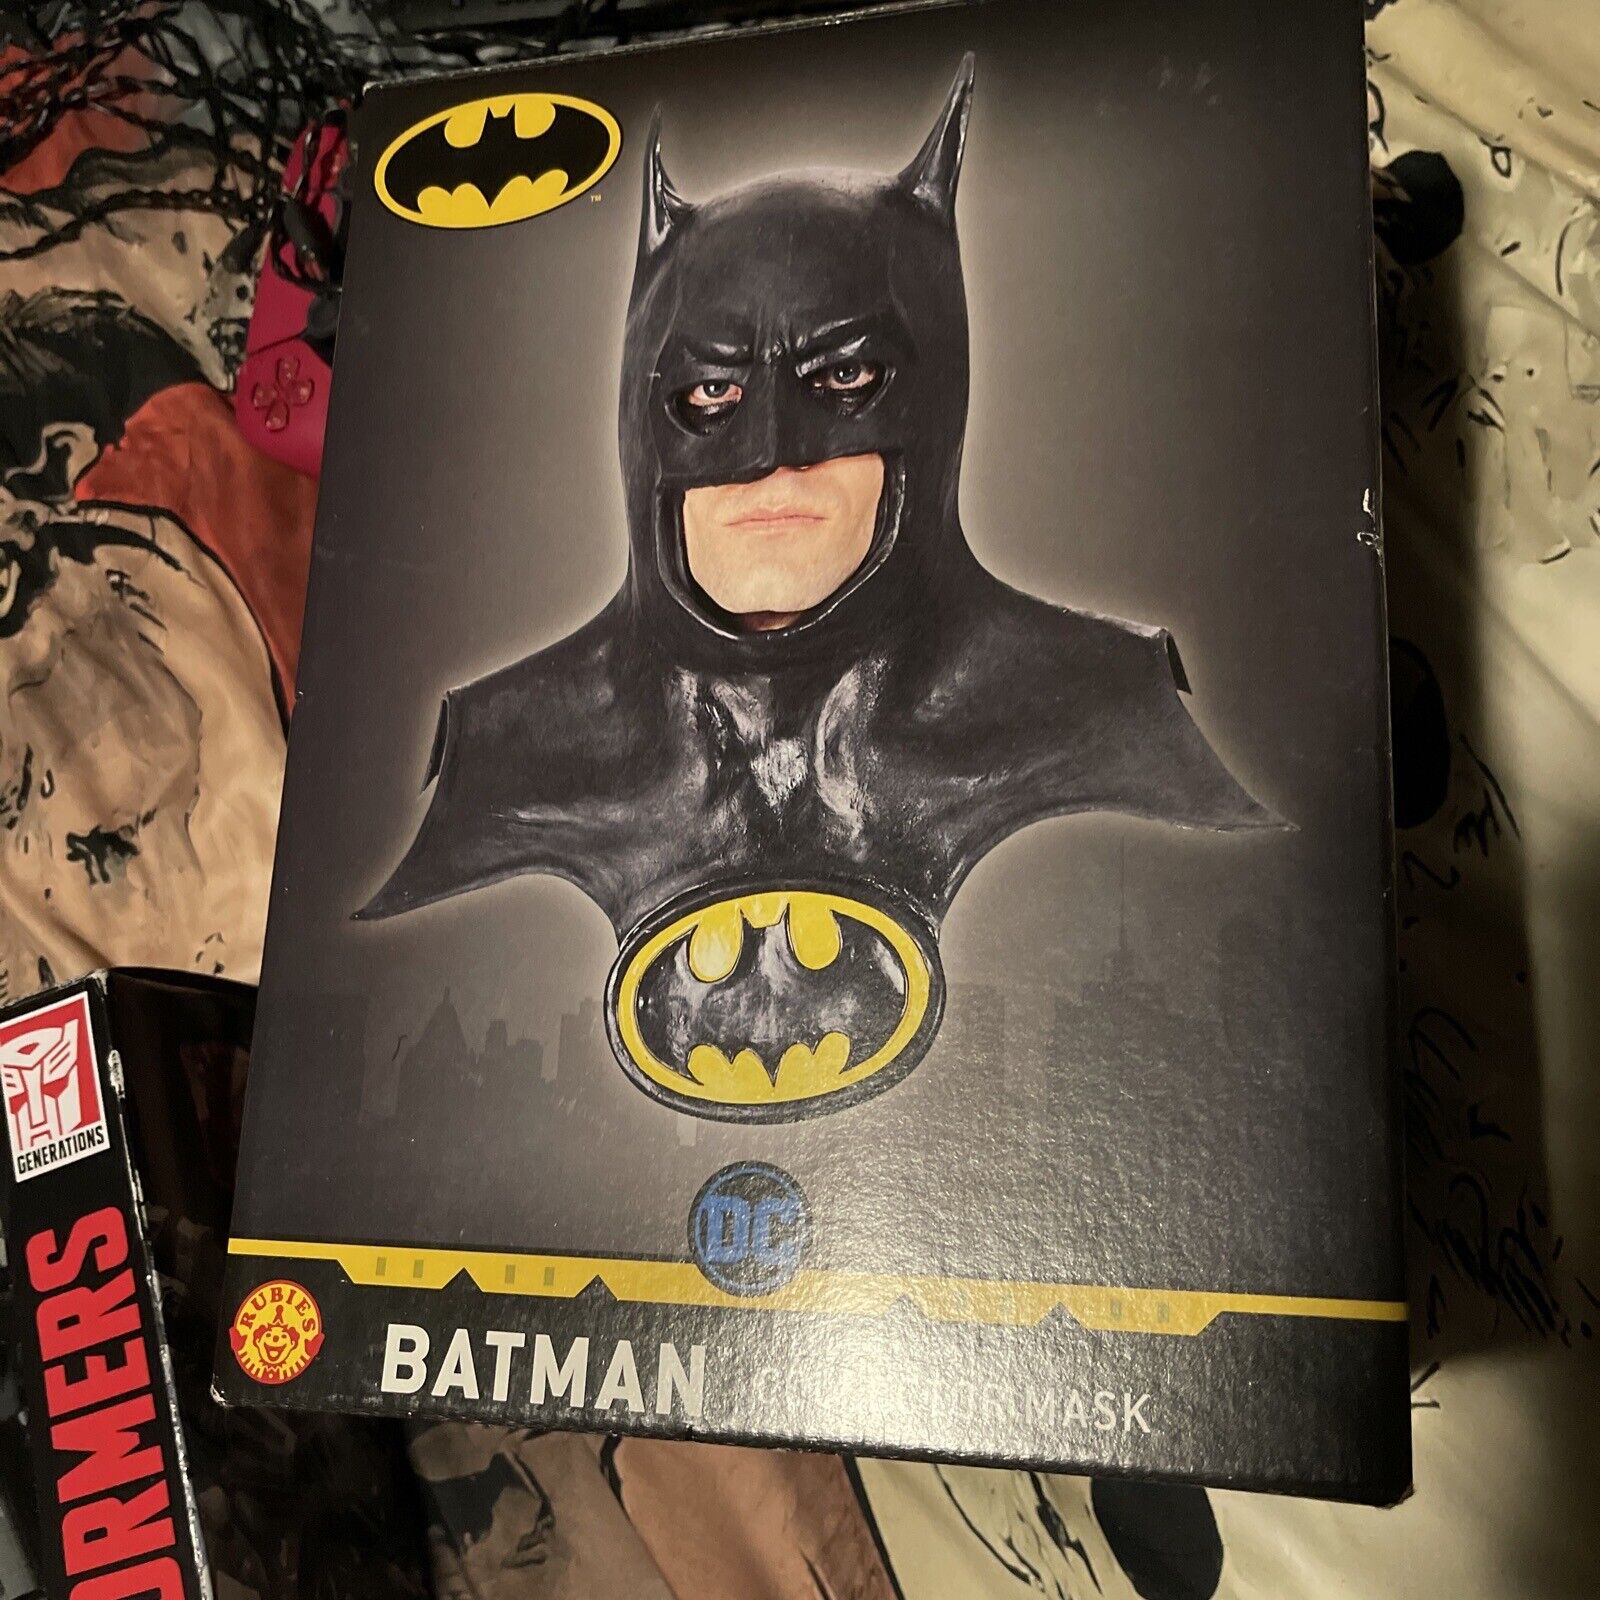 DC BATMAN COLLECTOR MASK LIMITED EDITION RUBIES